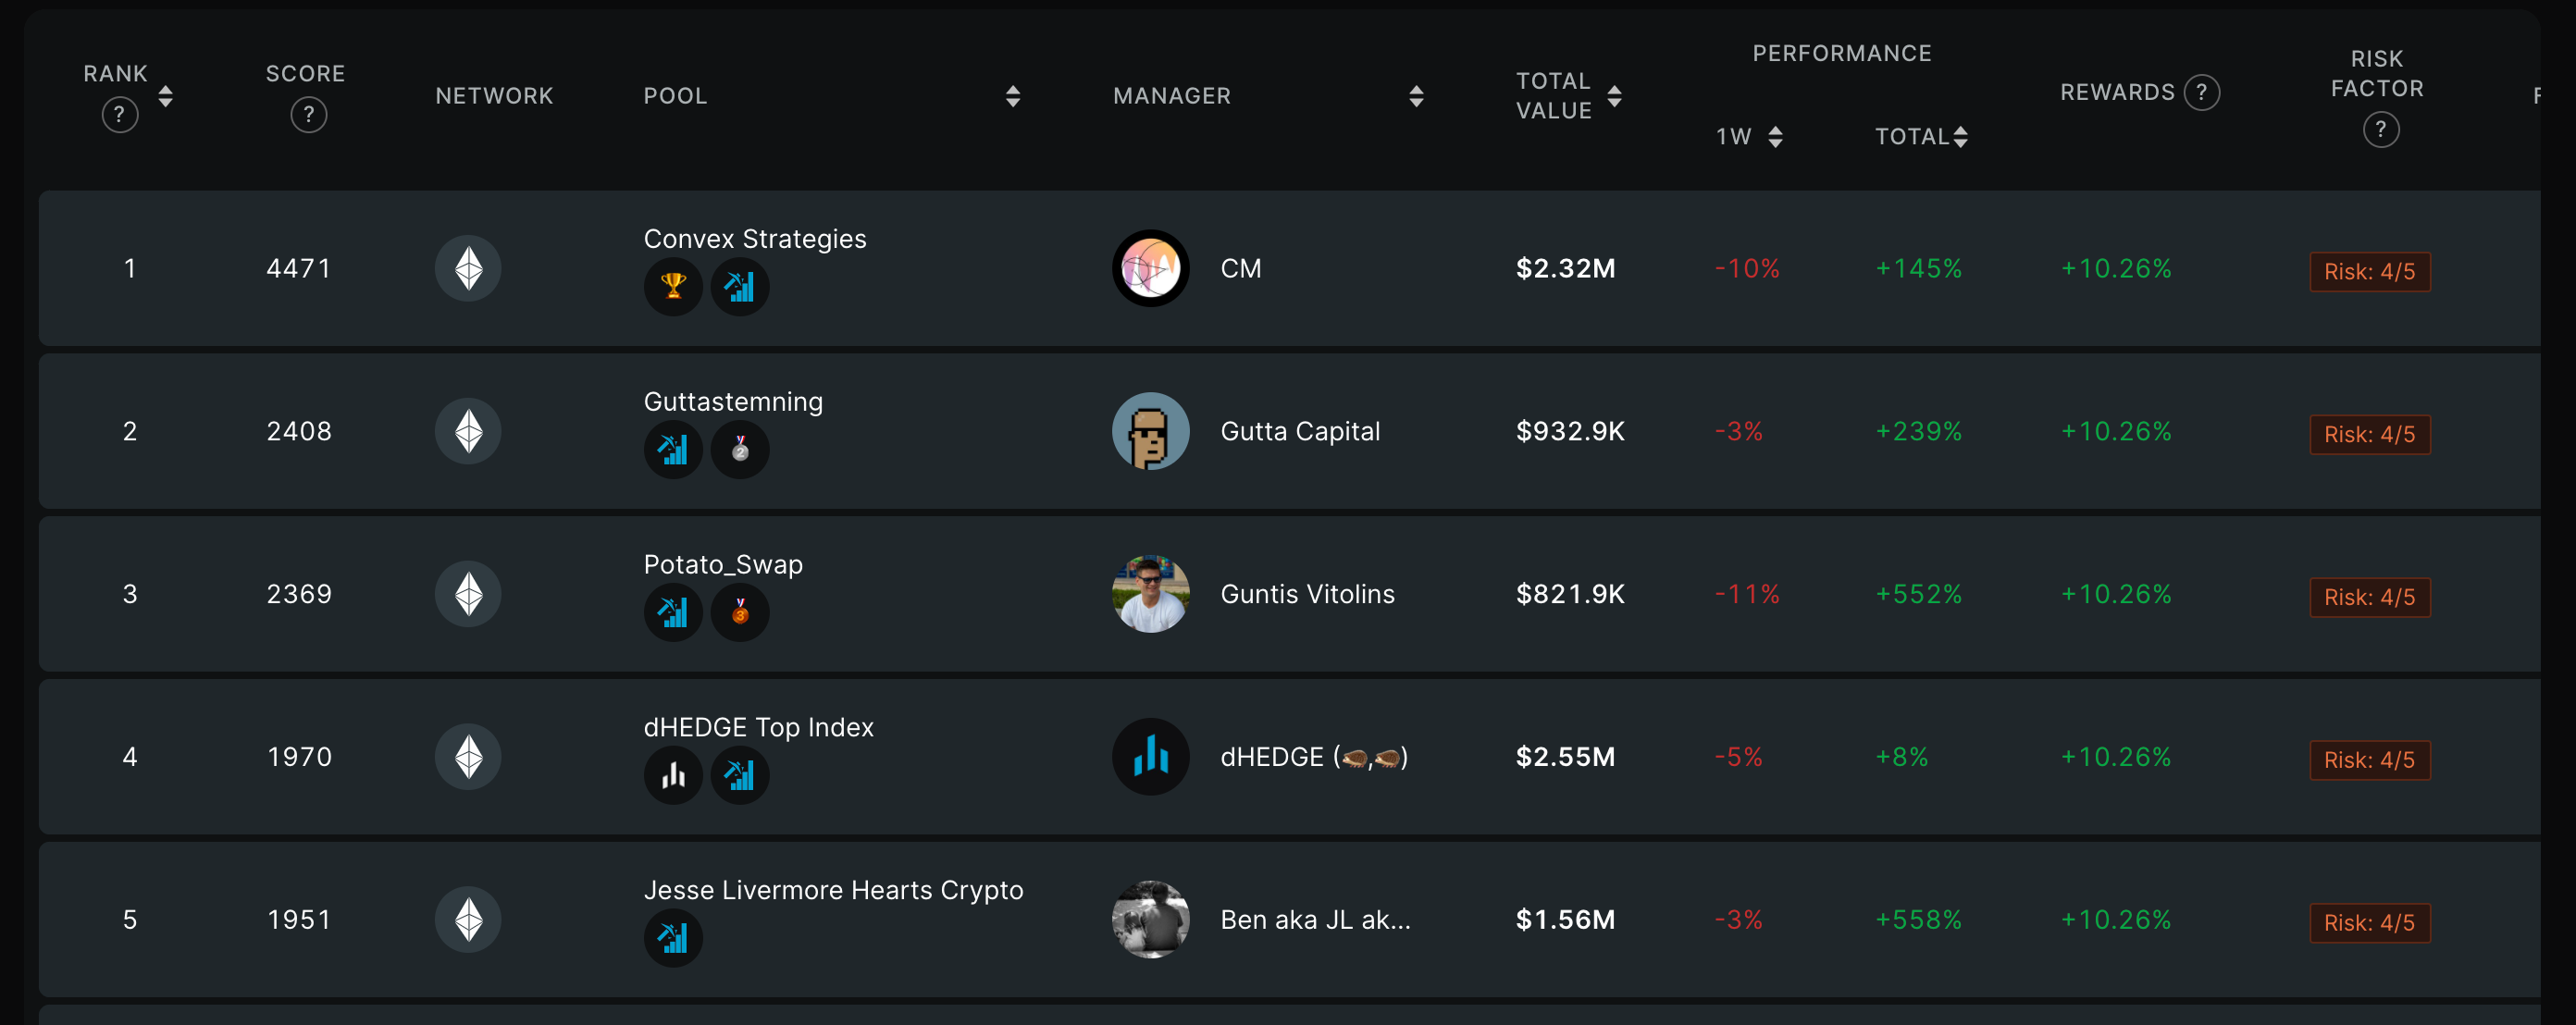 dHEDGE Leaderboard